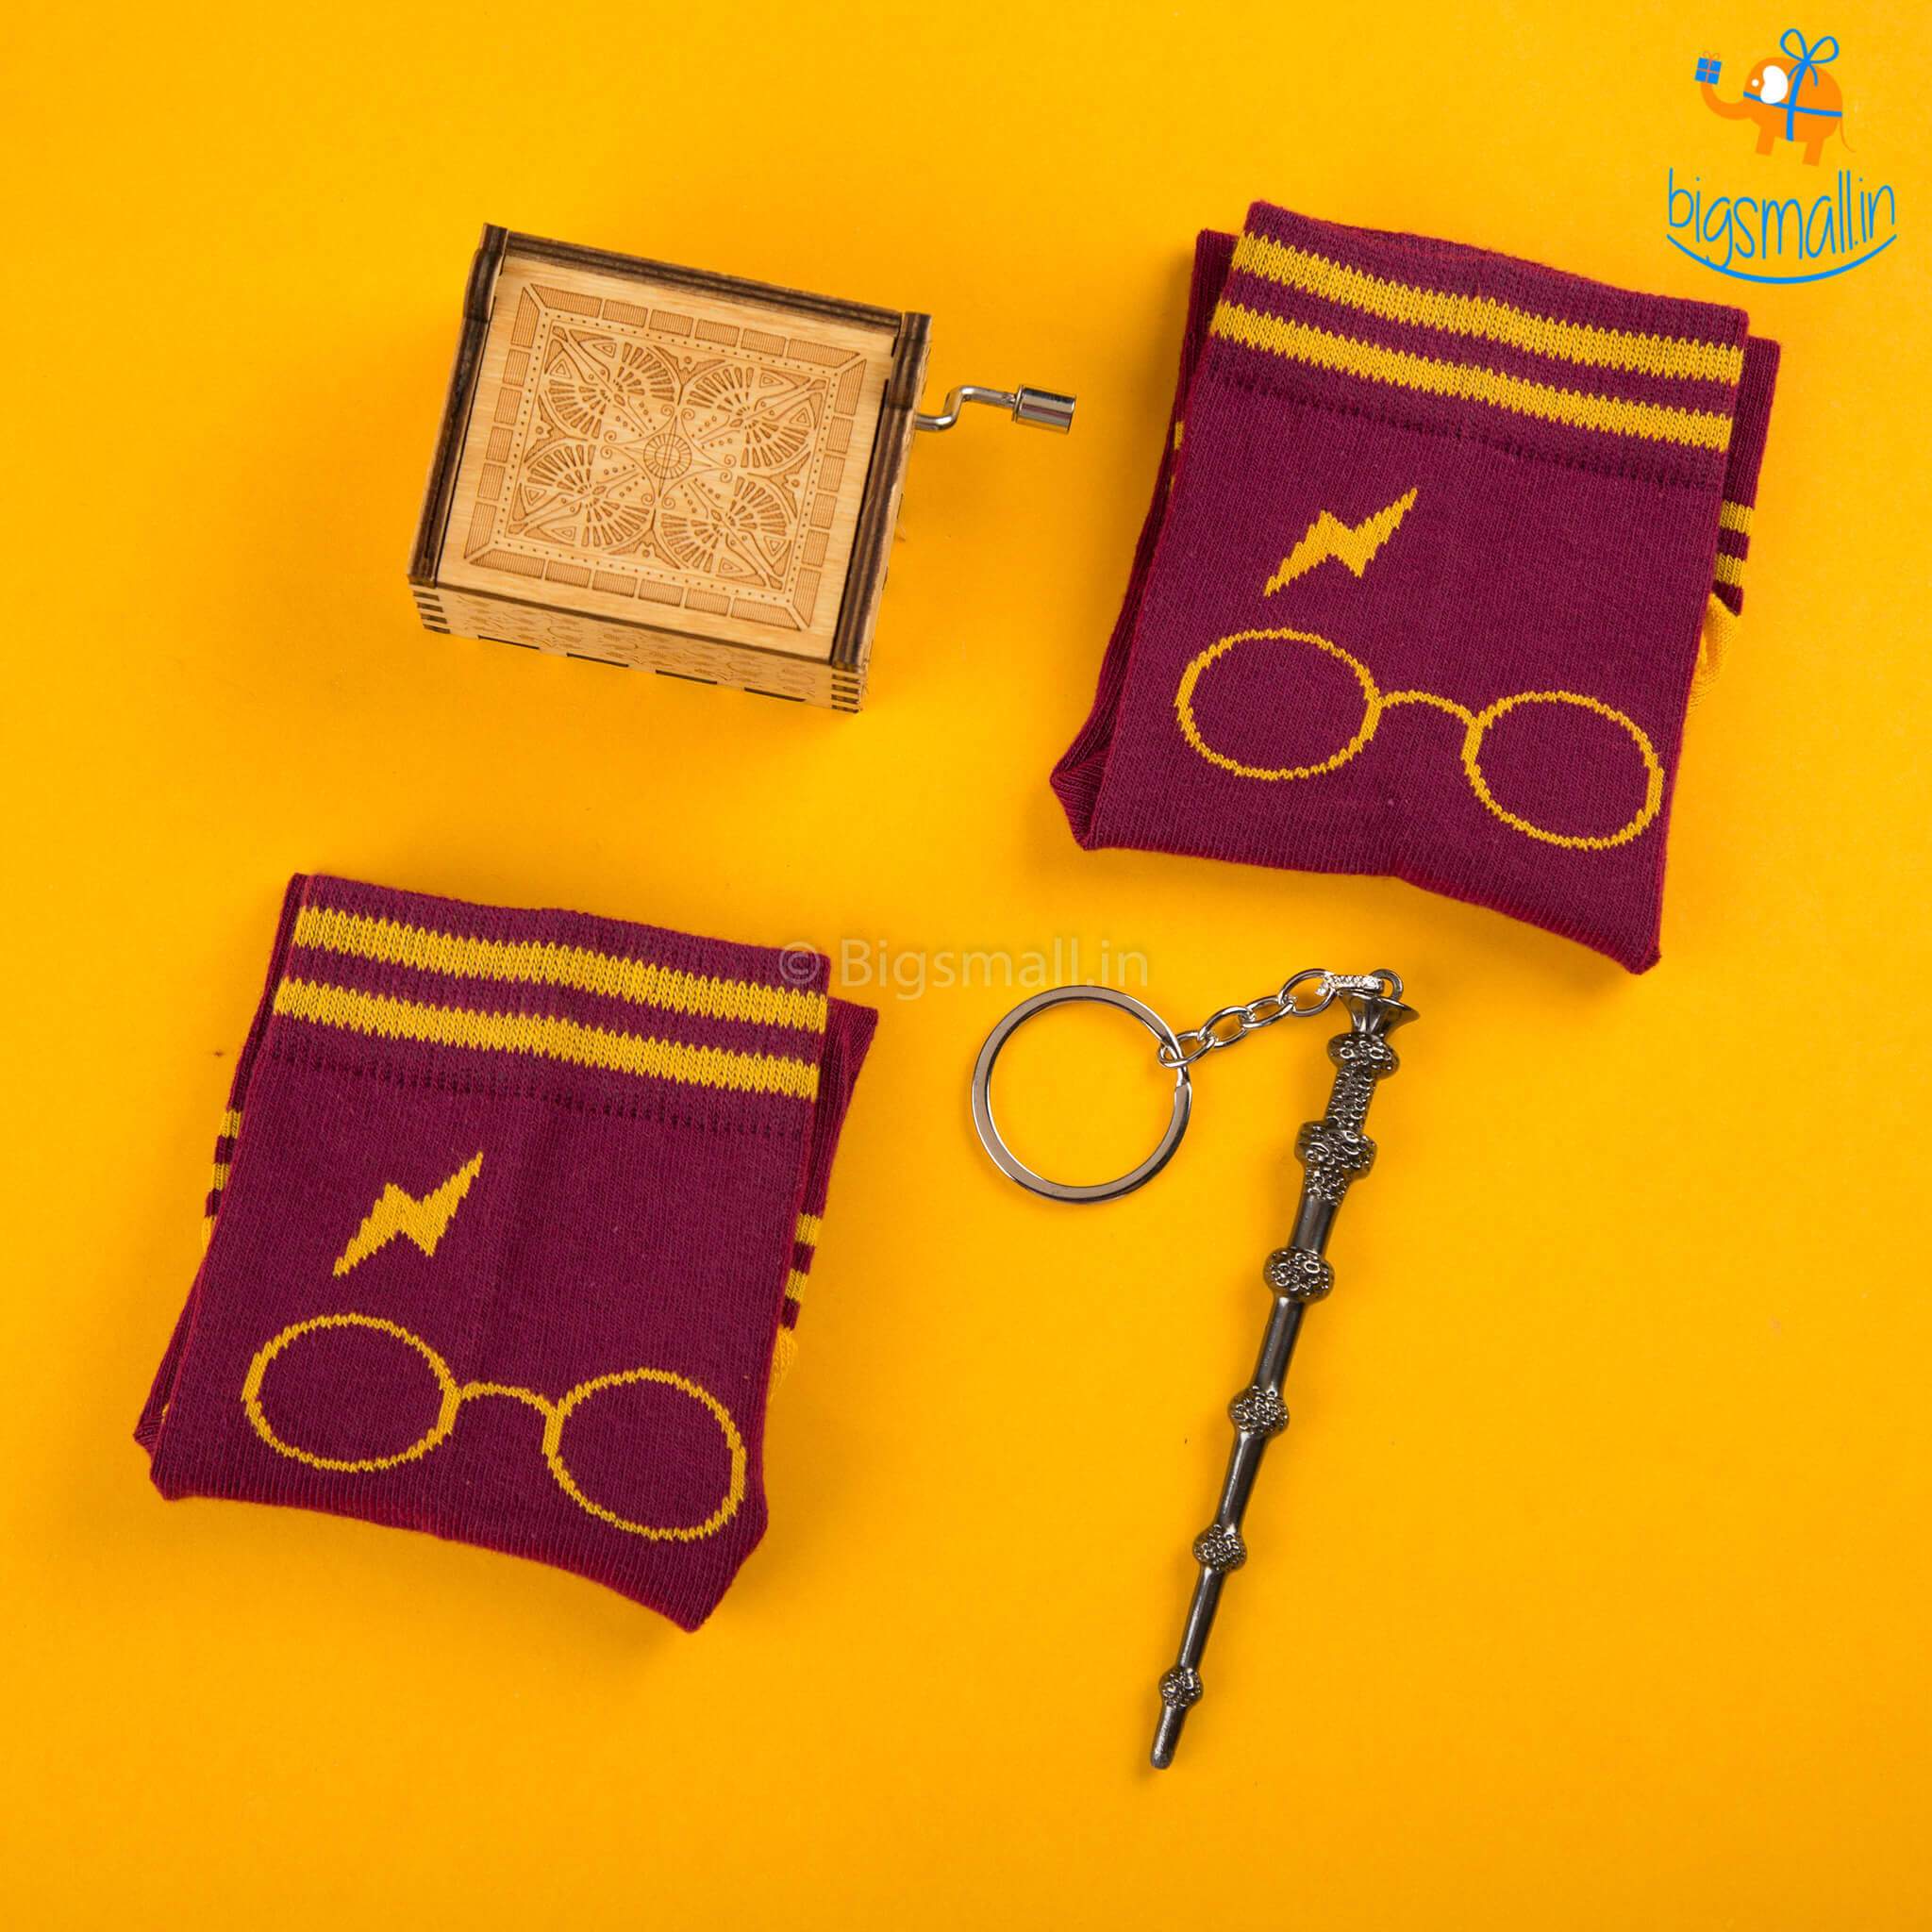 Buy CULTUREFLY Harry Potter Mug Set in Gift Box with Sticker and Pin,  Ceramic Coffee Mug, 12 oz. Online at Low Prices in India - Amazon.in